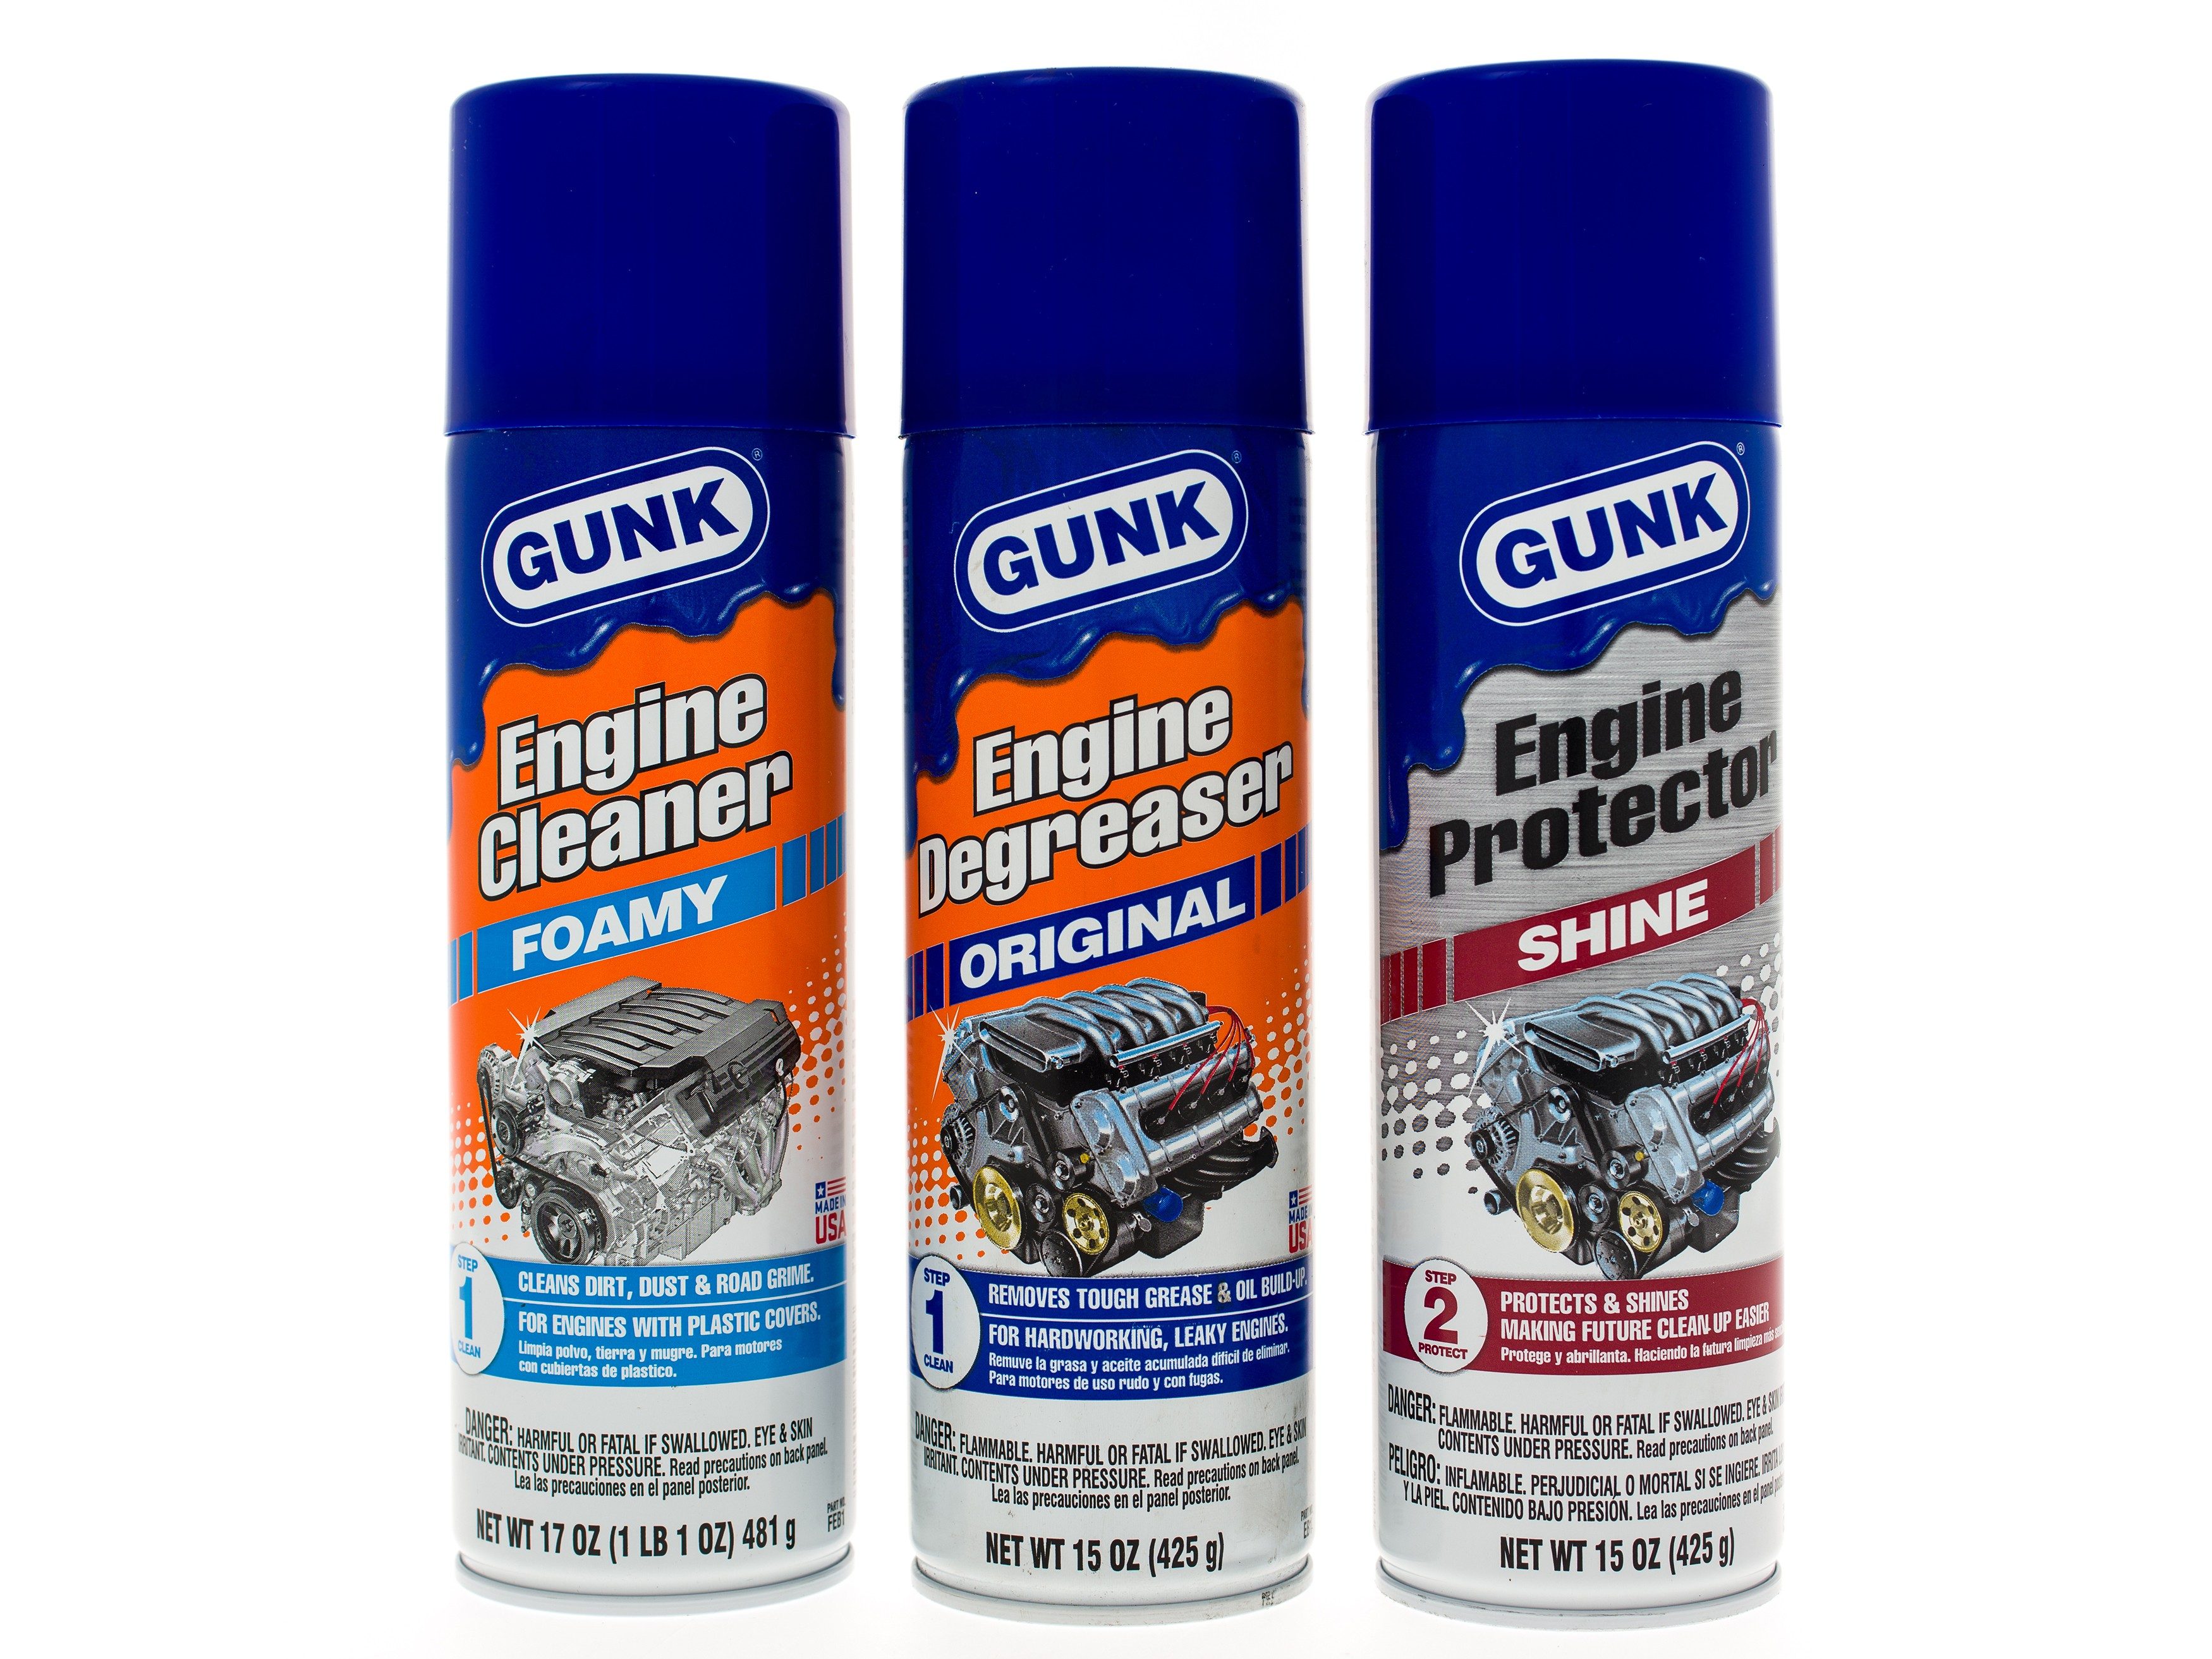 Picking an Engine Degreasing Product